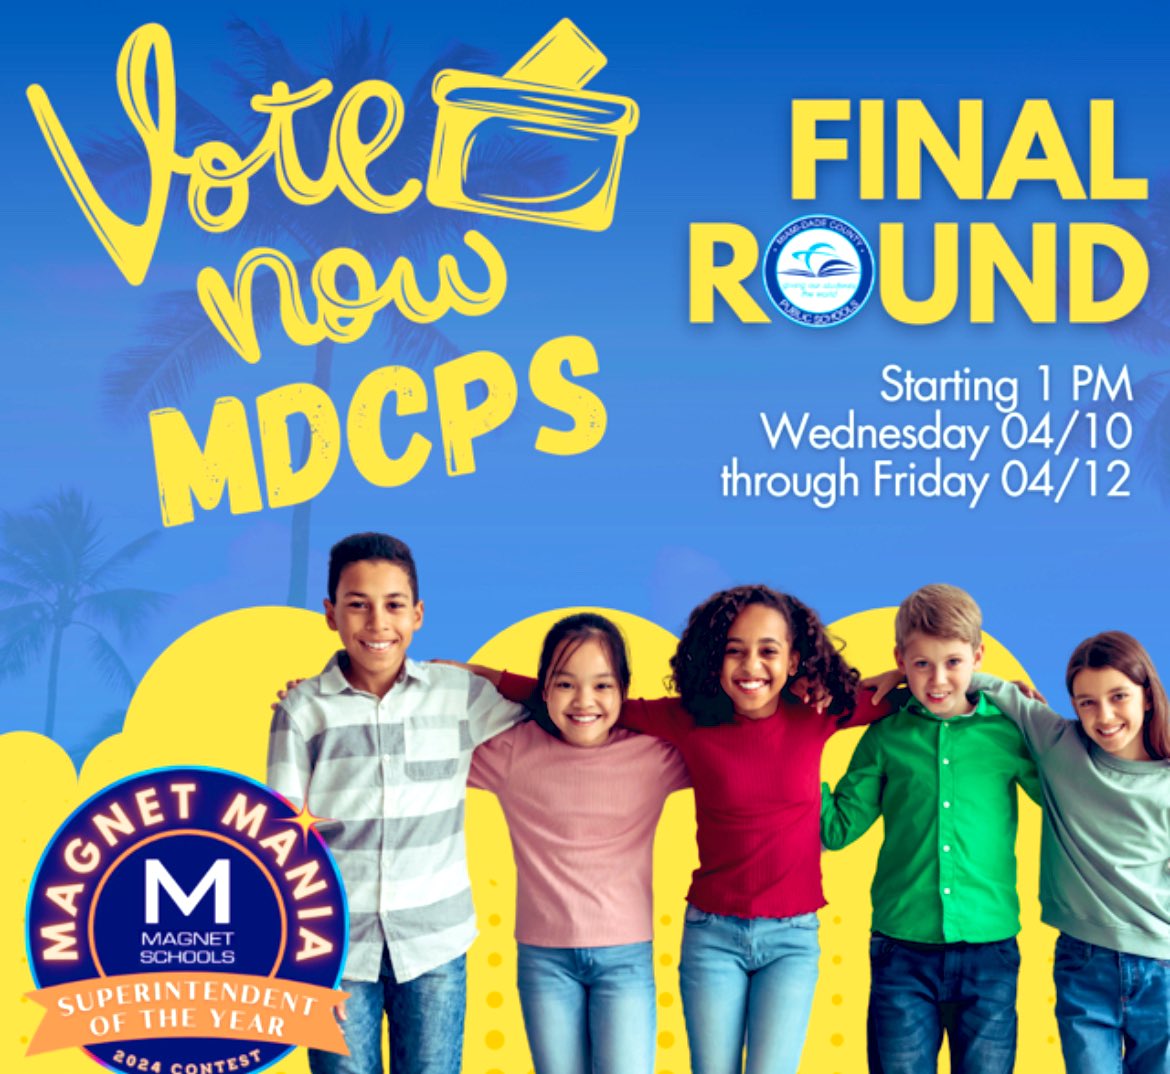 🌟 Every vote counts! Let’s rally together and cast our votes for MDCPS in the FINAL ROUND of the Magnet Mania SOY Contest! Voting is open. Let’s make it happen! 🗳️✨  Vote here: shorturl.at/pFGP1 or Google 'Magnet Mania 2024' #YourBestChoiceMDCPS #MagnetMania